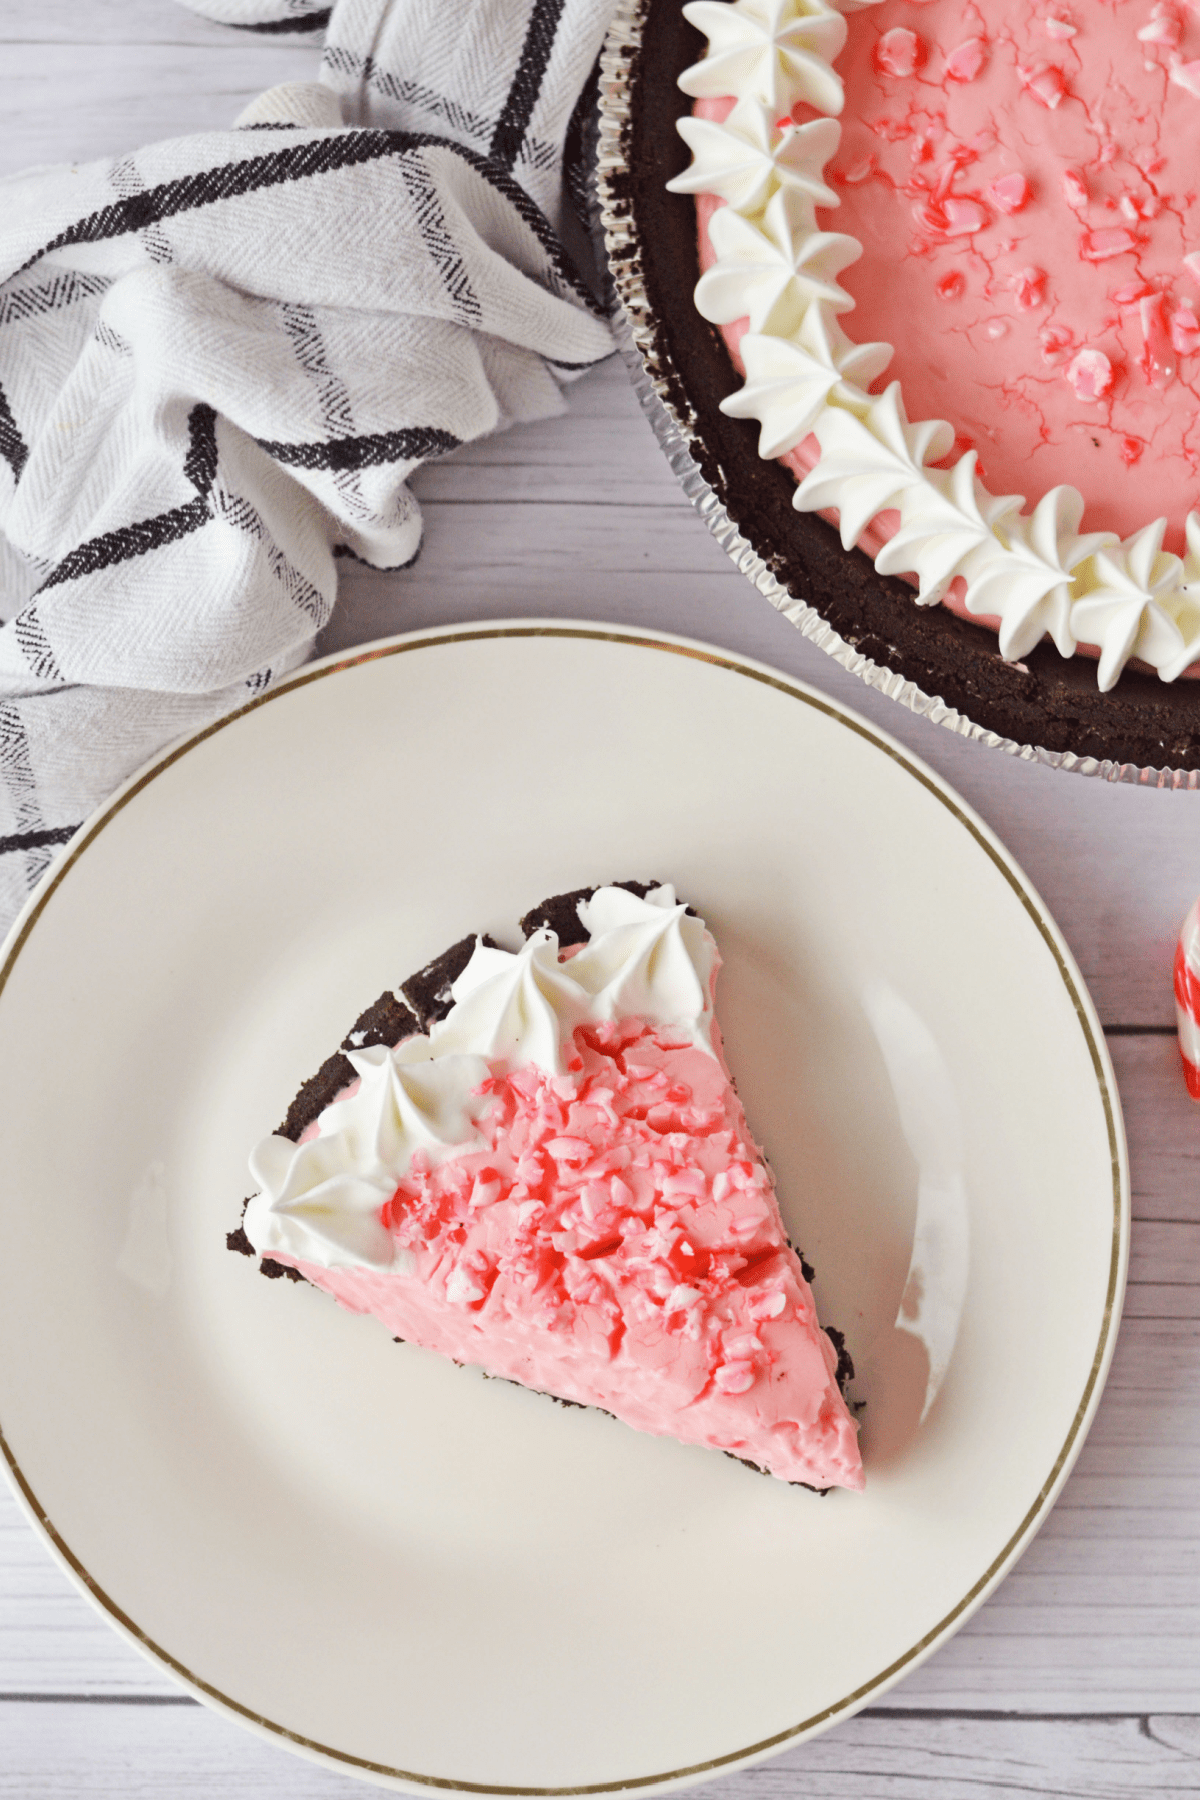 Slice of no bake peppermint pie on plate